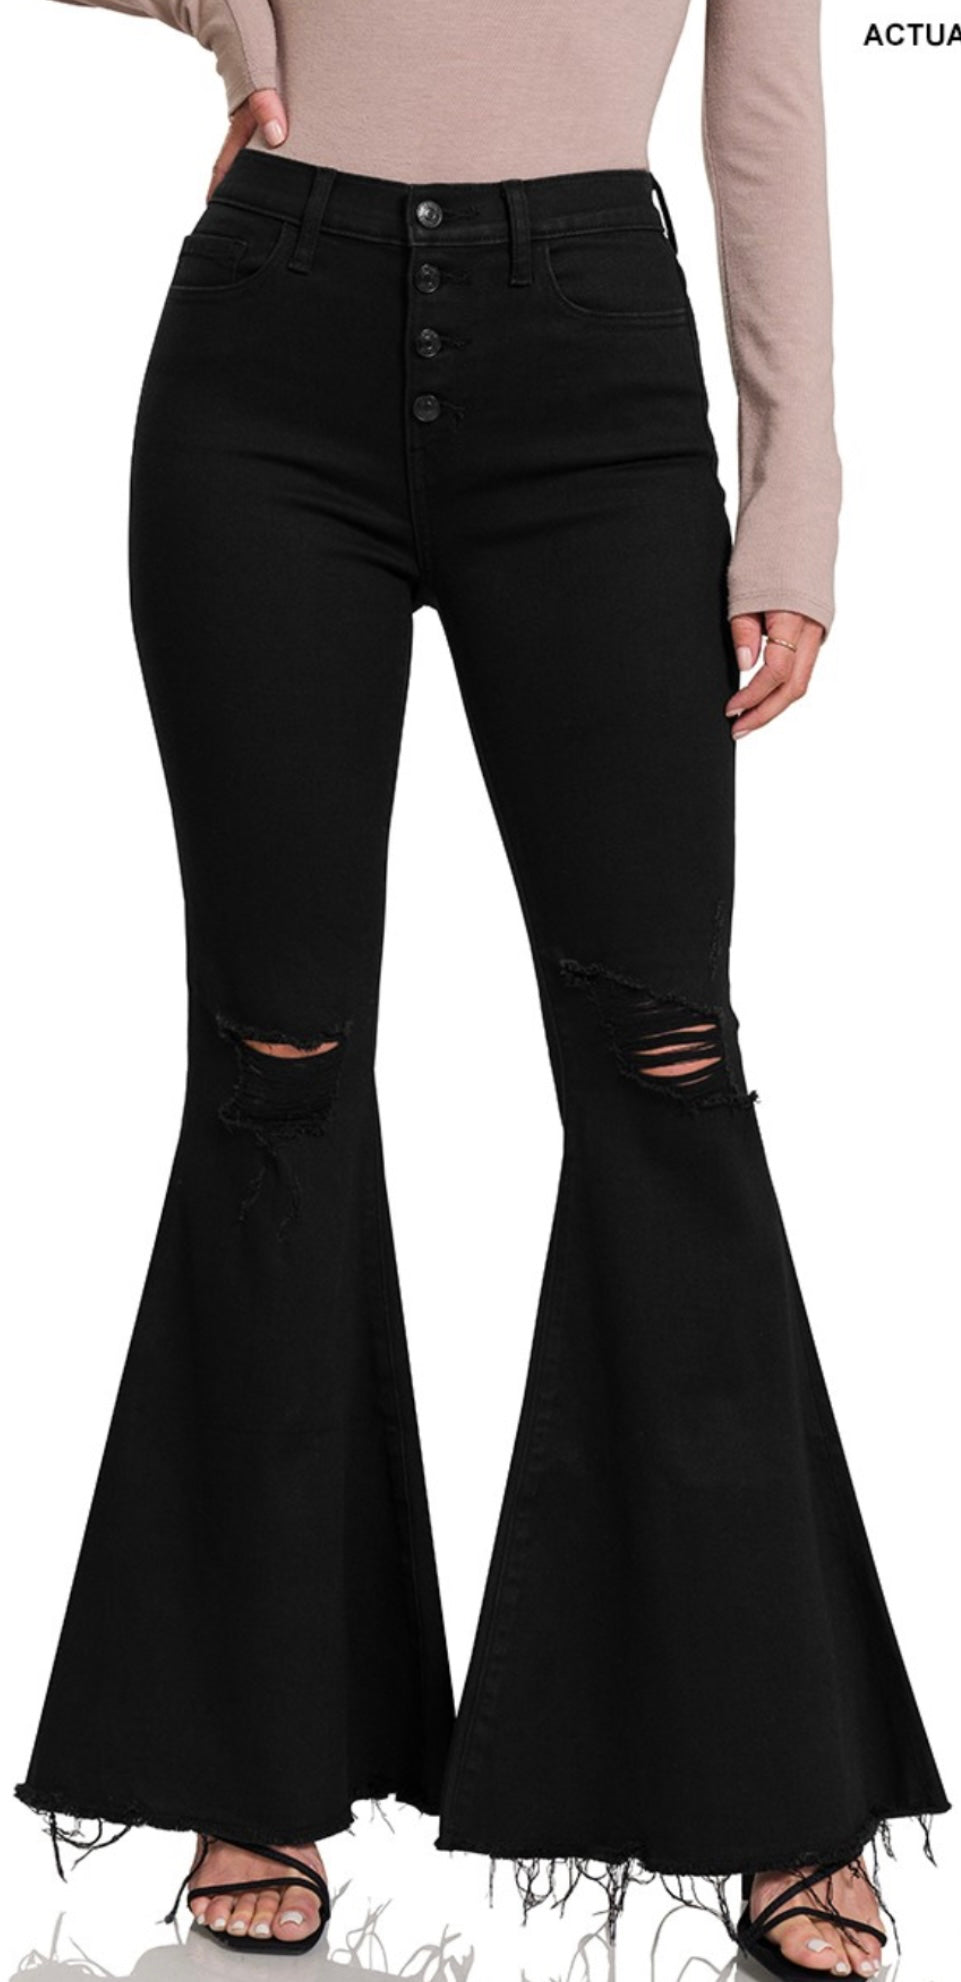 MOLLY DISTRESSED HIGH RISE BELL BOTTOM BLACK JEANS – The Cactus